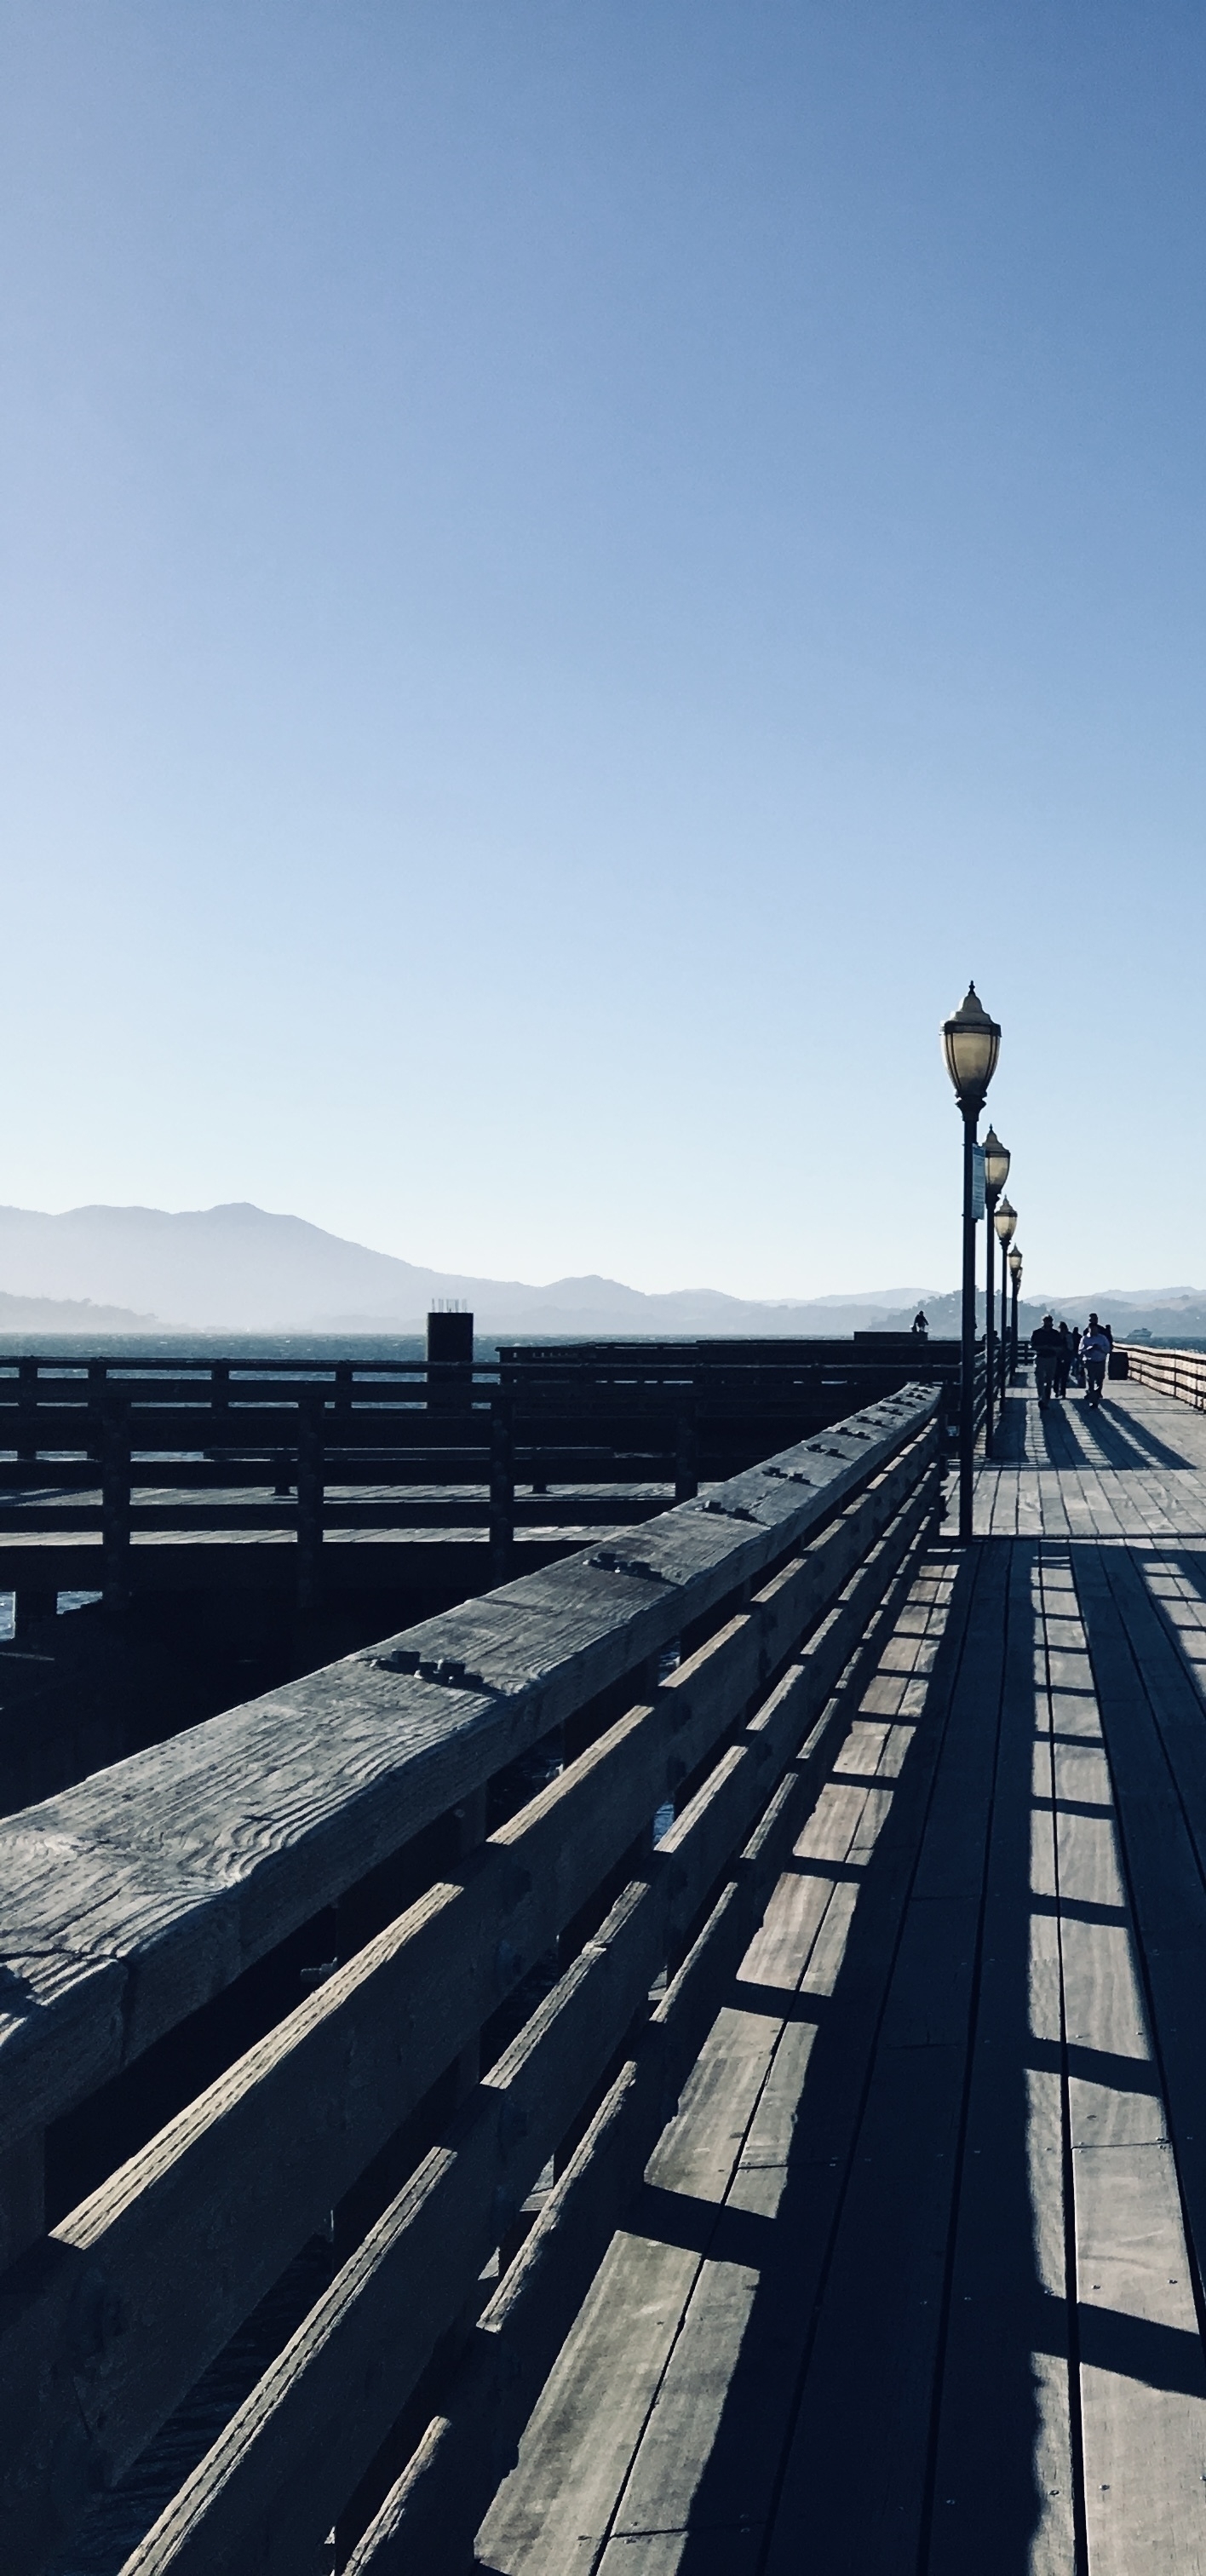 A wooden pier with lamps, and hills visible through the haze on the horizon.